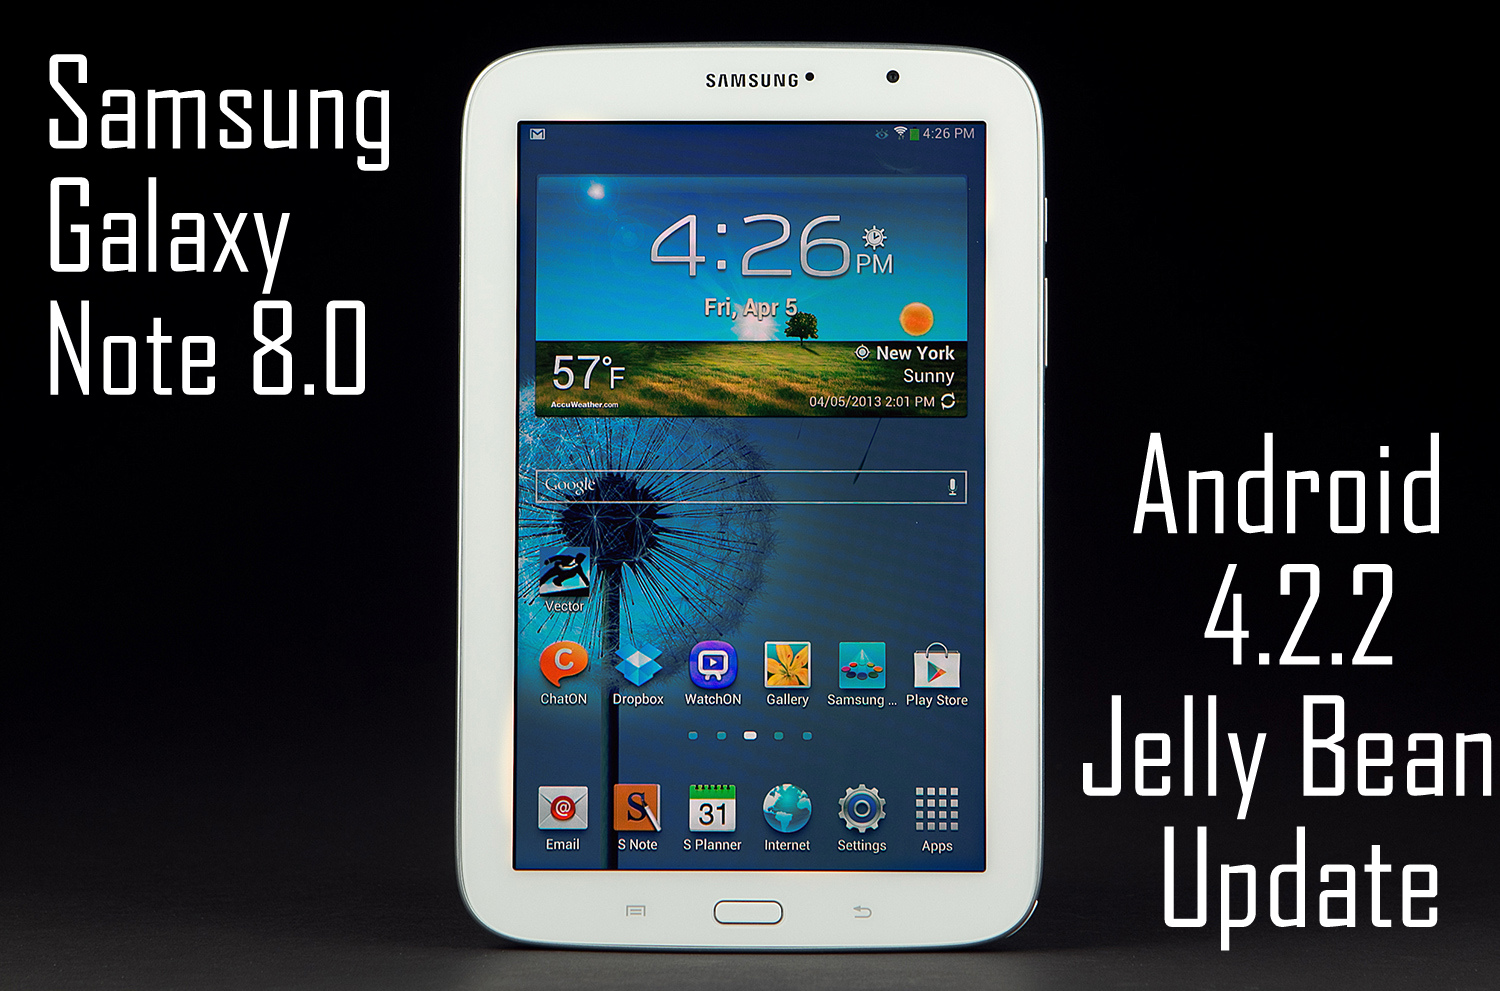 ... Android 4.2.2, Jelly Bean, Latest android version for galaxy Note 8.0